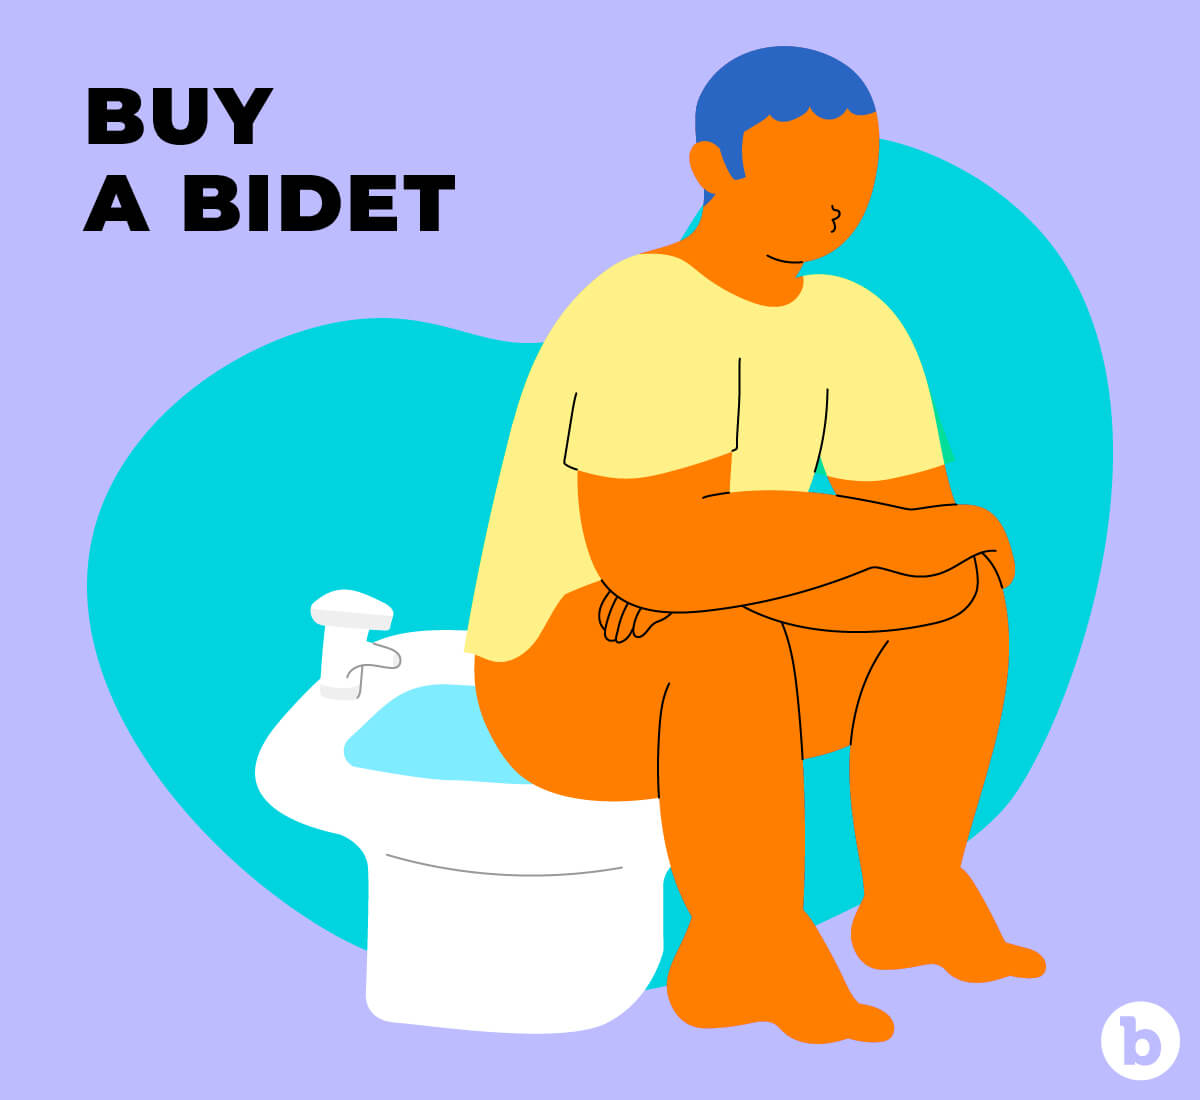 Investing in a bidet could be another booty resolution for 2021